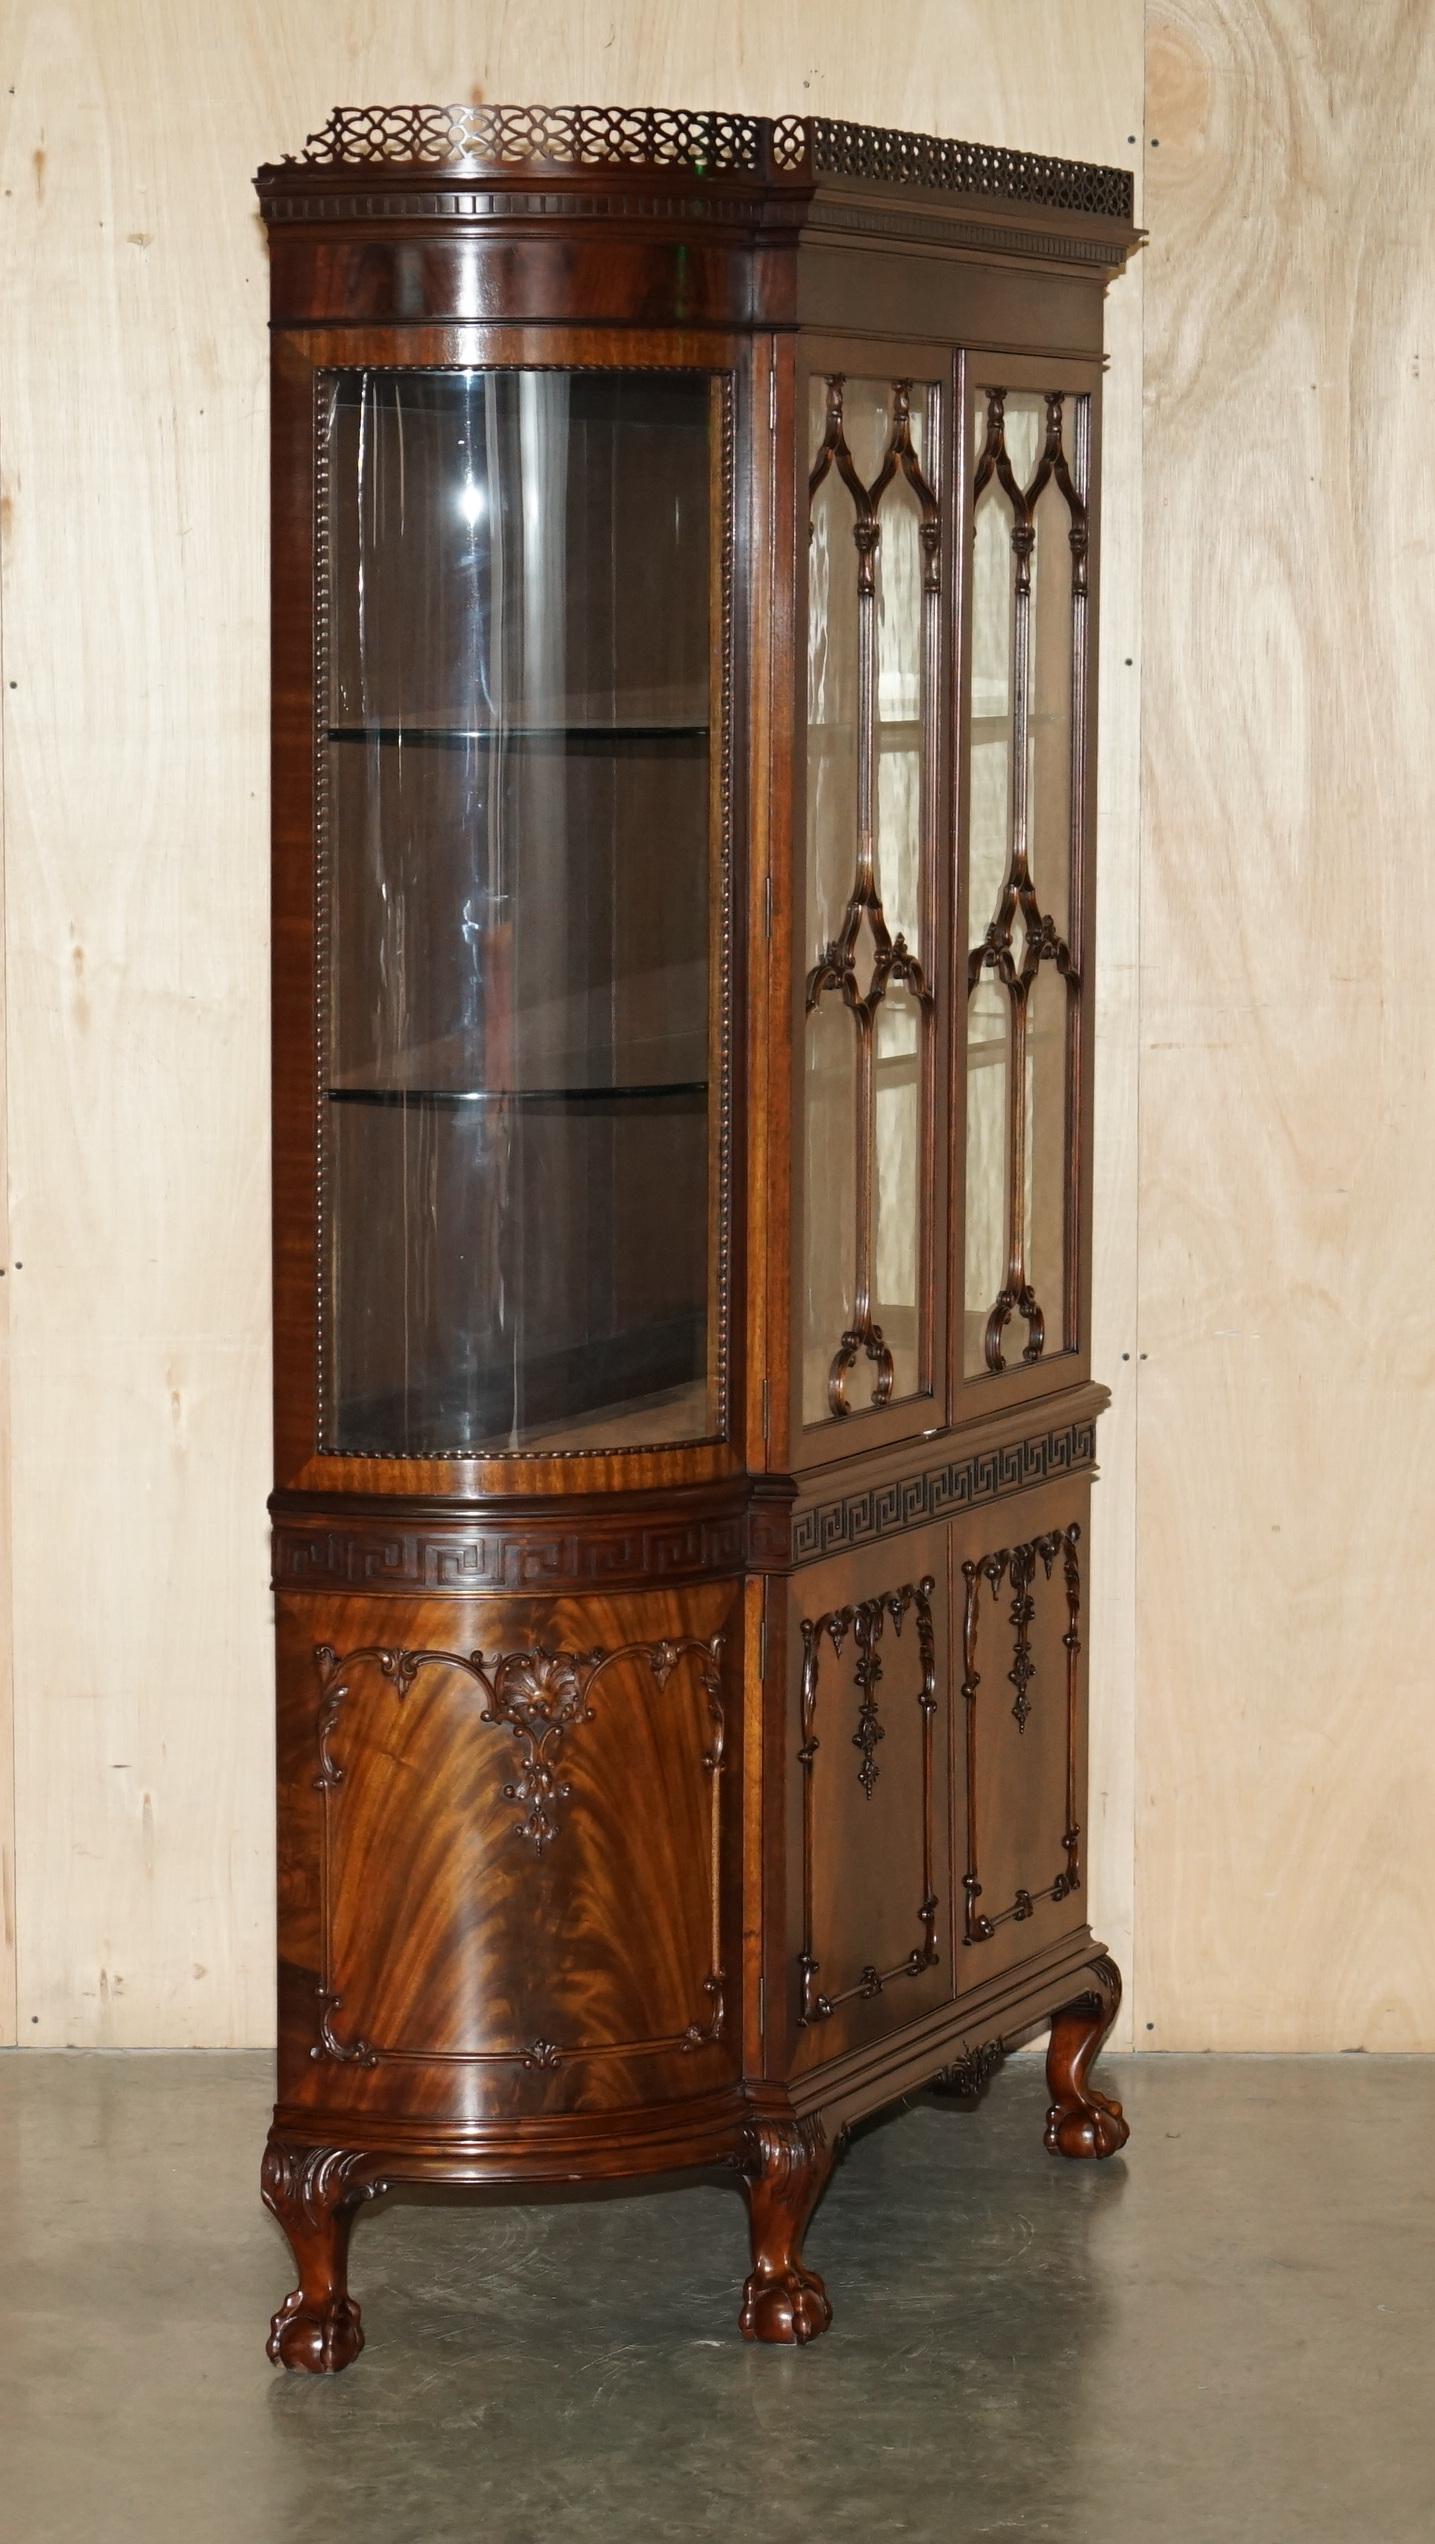 EXQUISITÉ CHARLES BAKER OF CHIPPENDALE HOUSE STAMPED DISPLAY CABINET en vente 5